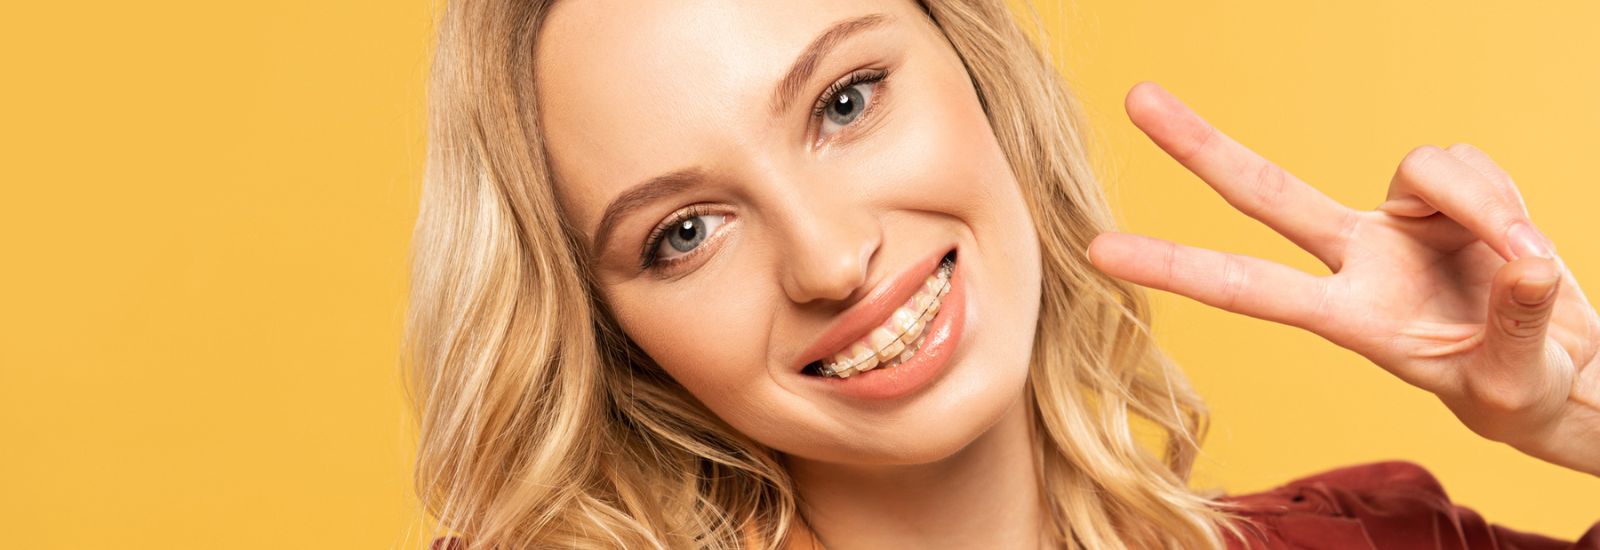 Smiling woman with dental braces - Orthodontic Treatment